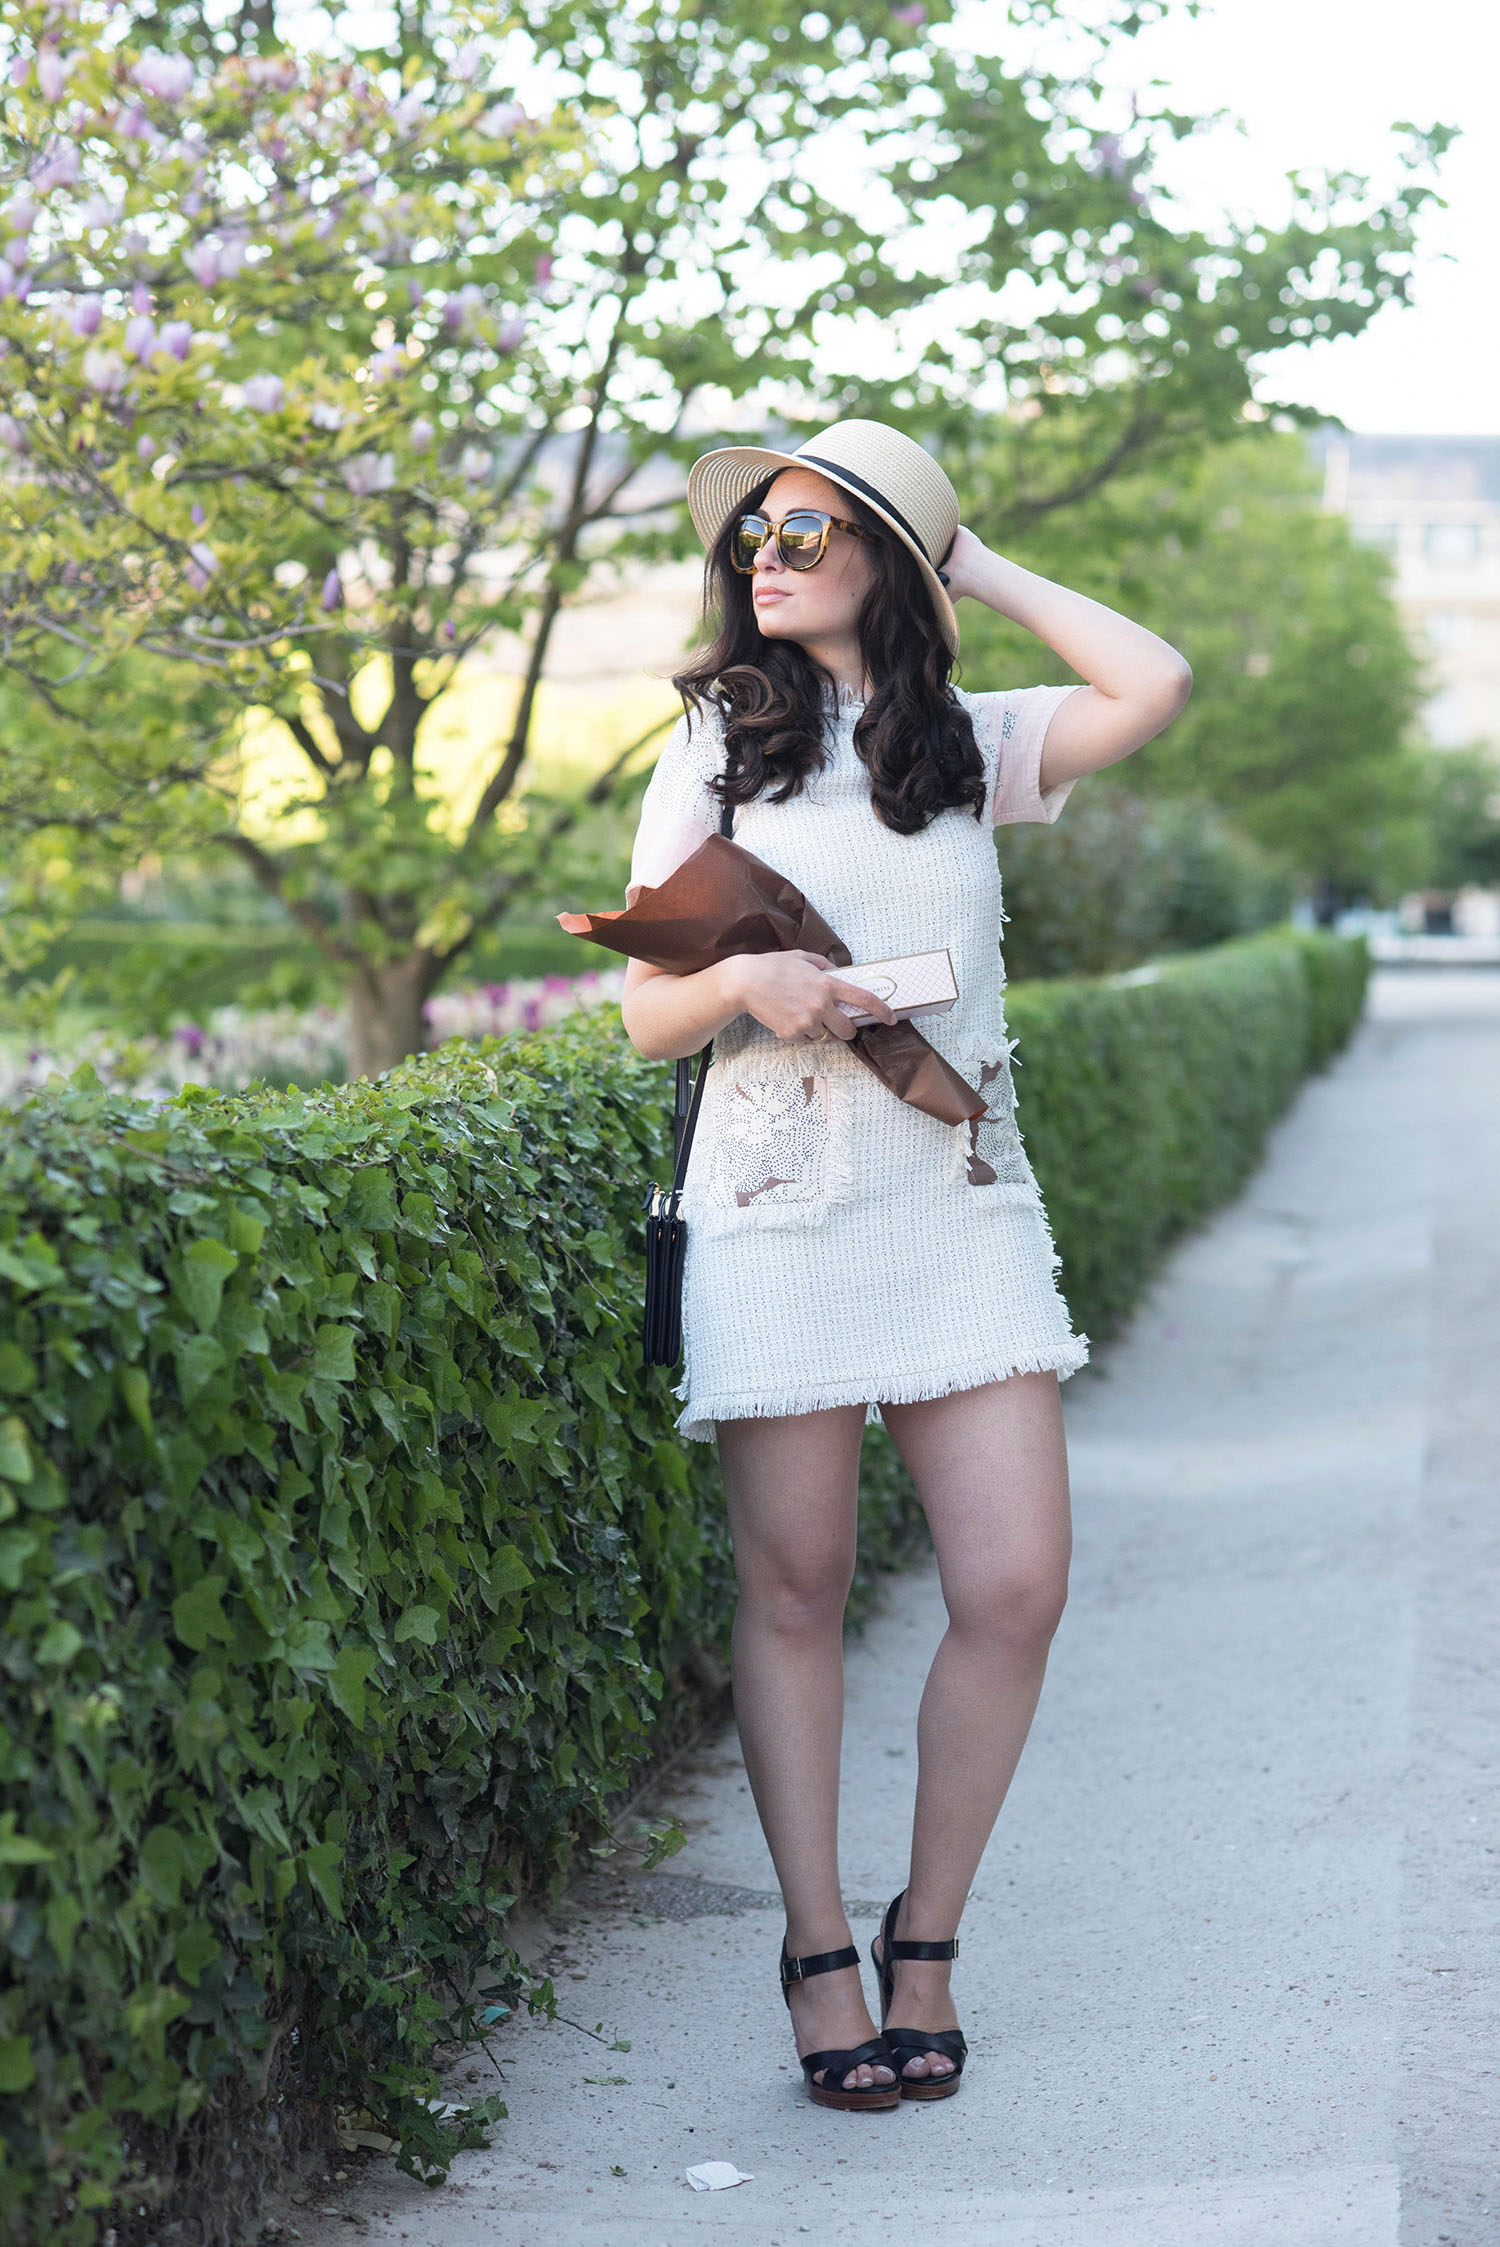 Fashion blogger Cee Fardoe of Coco & Vera in the Palais Royal garden in Paris wearing a Floriane Fosso dress and Anine Bing sunglasses